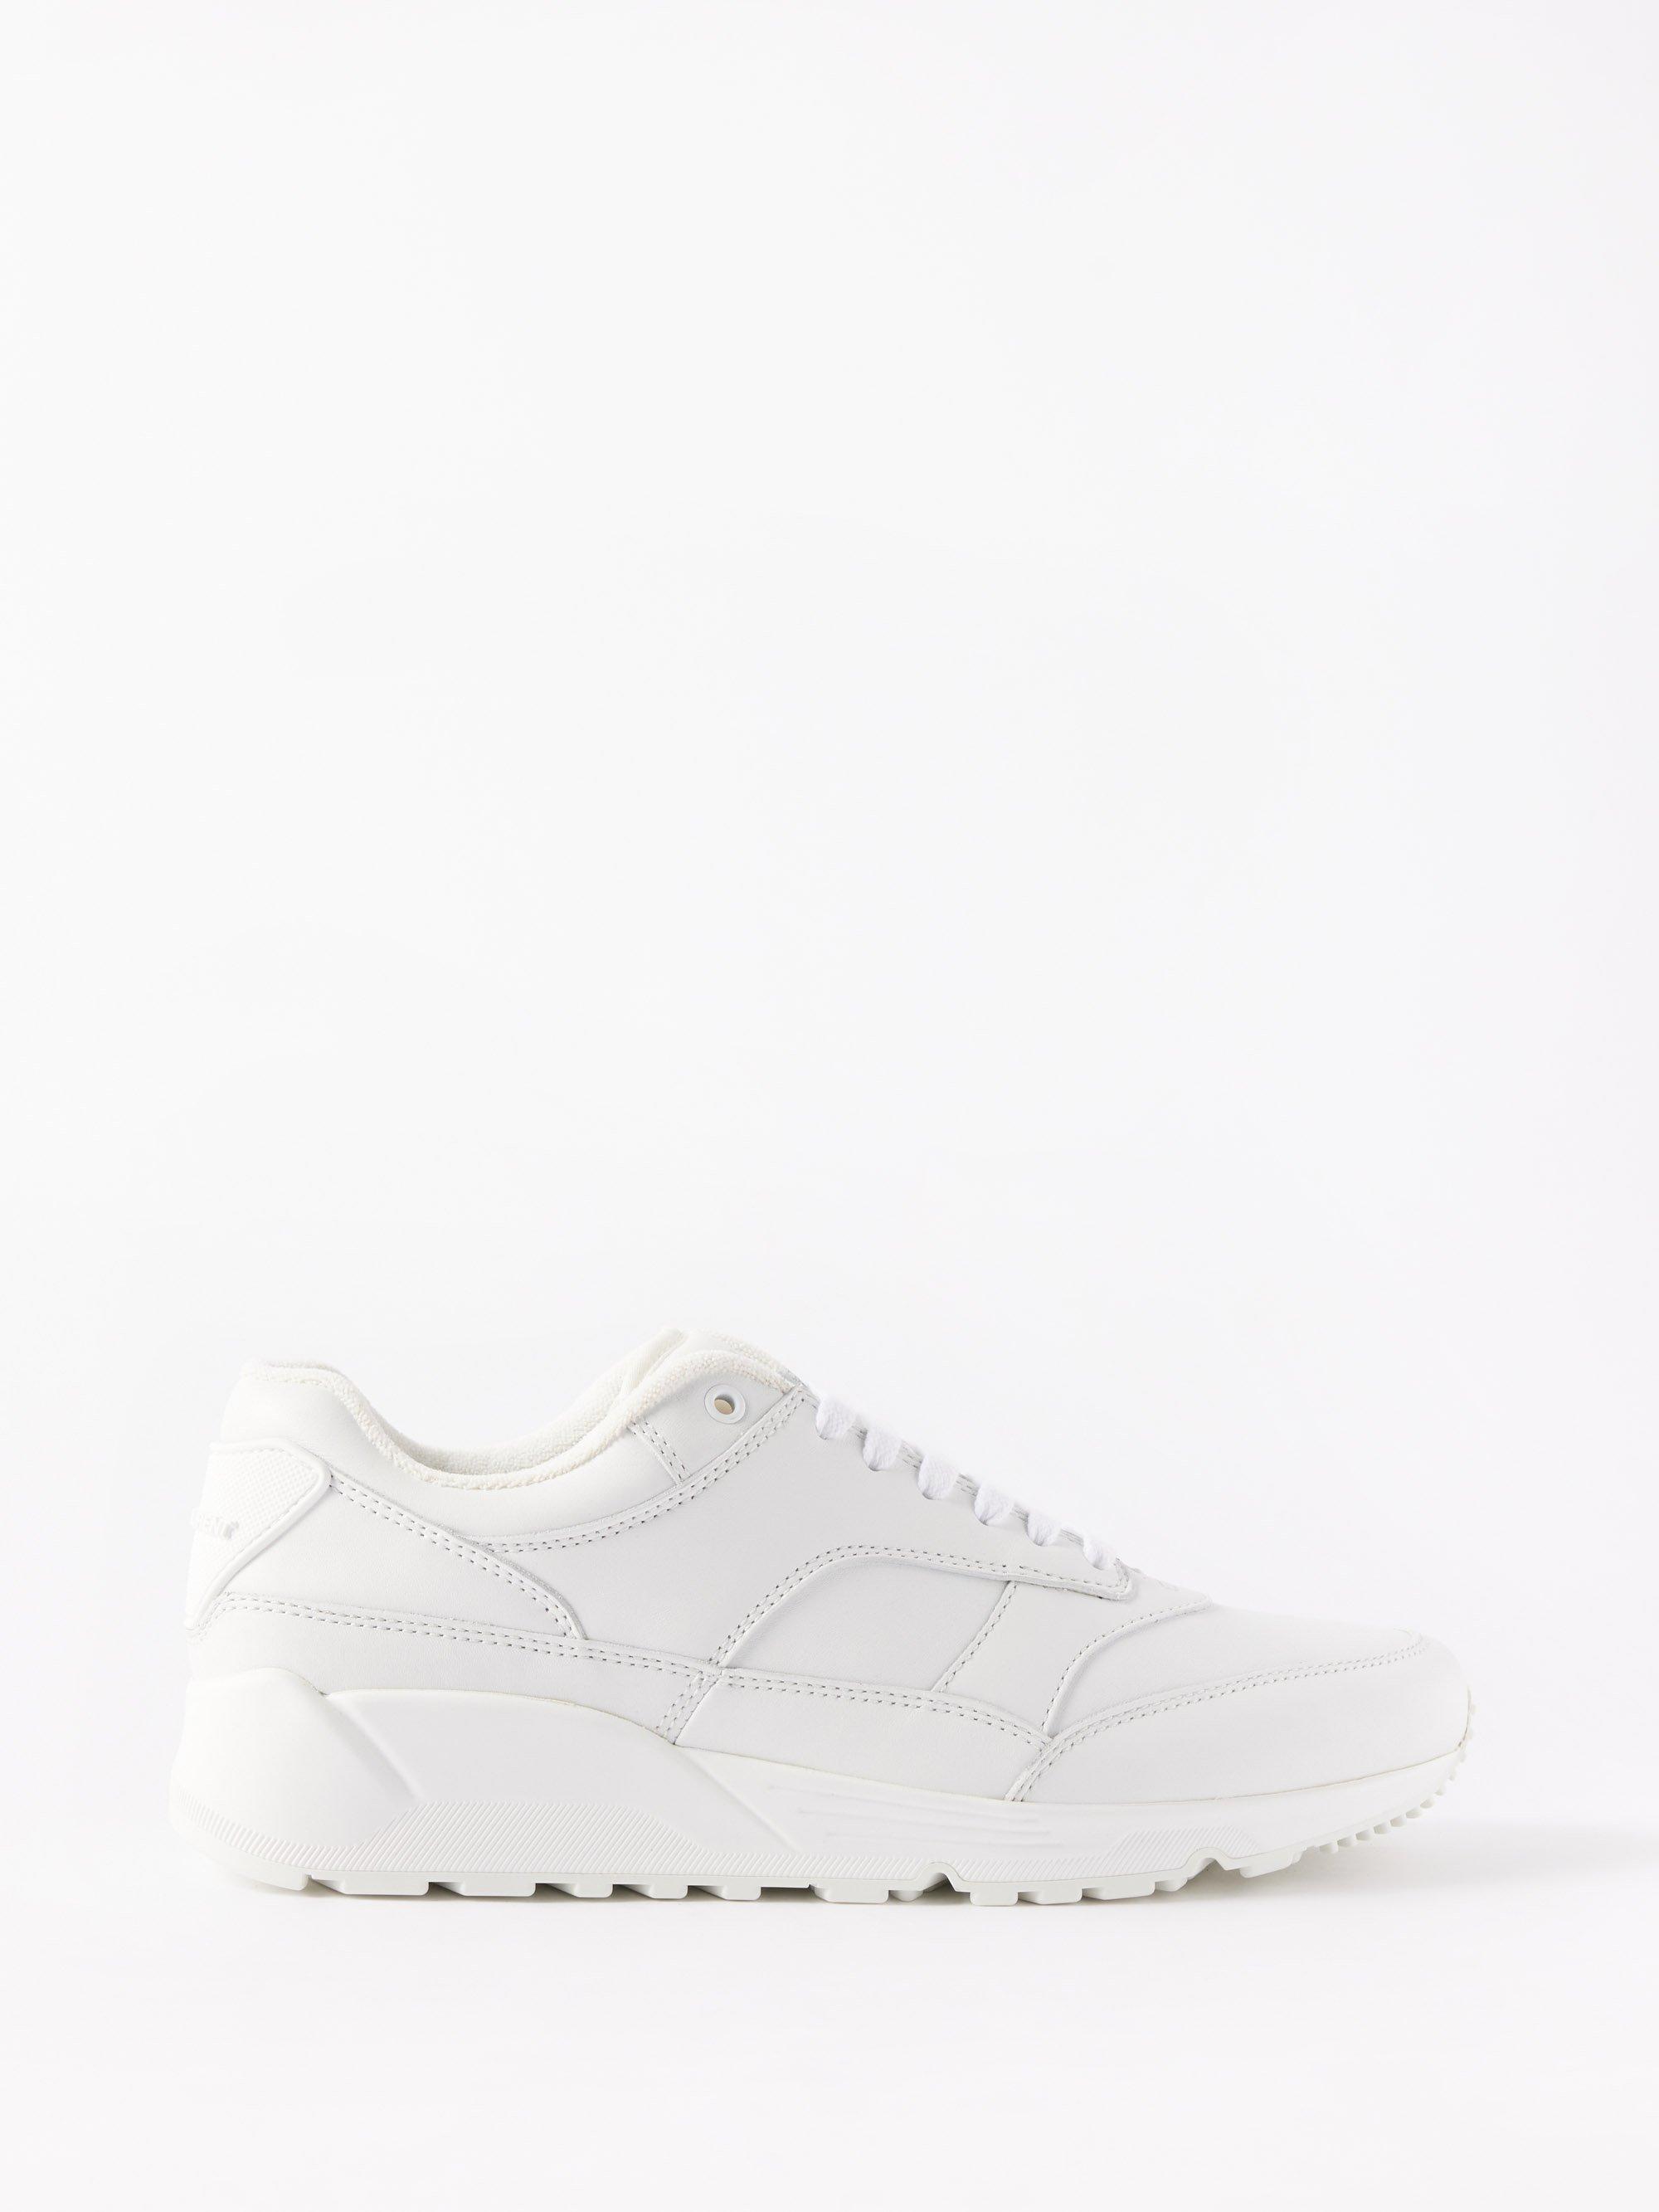 BUMP sneakers in smooth leather, Saint Laurent